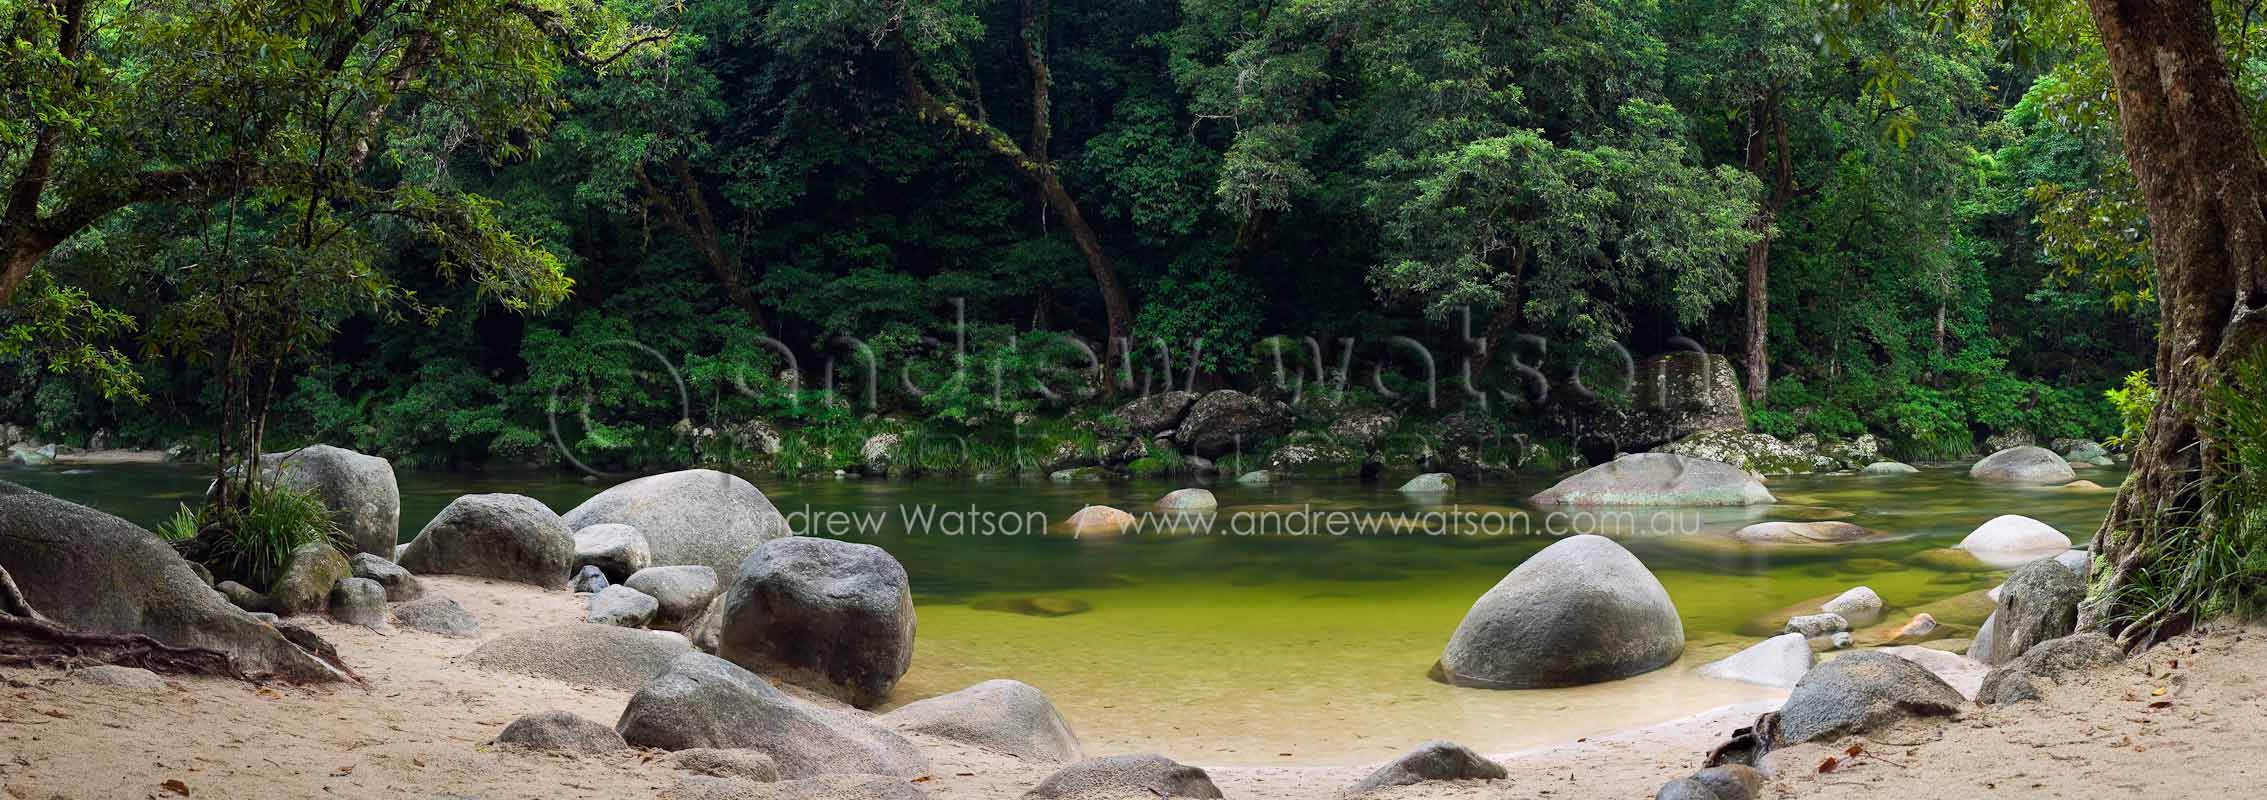 Image of clear waters and boulders at a popular swimming spot in Mossman Gorge